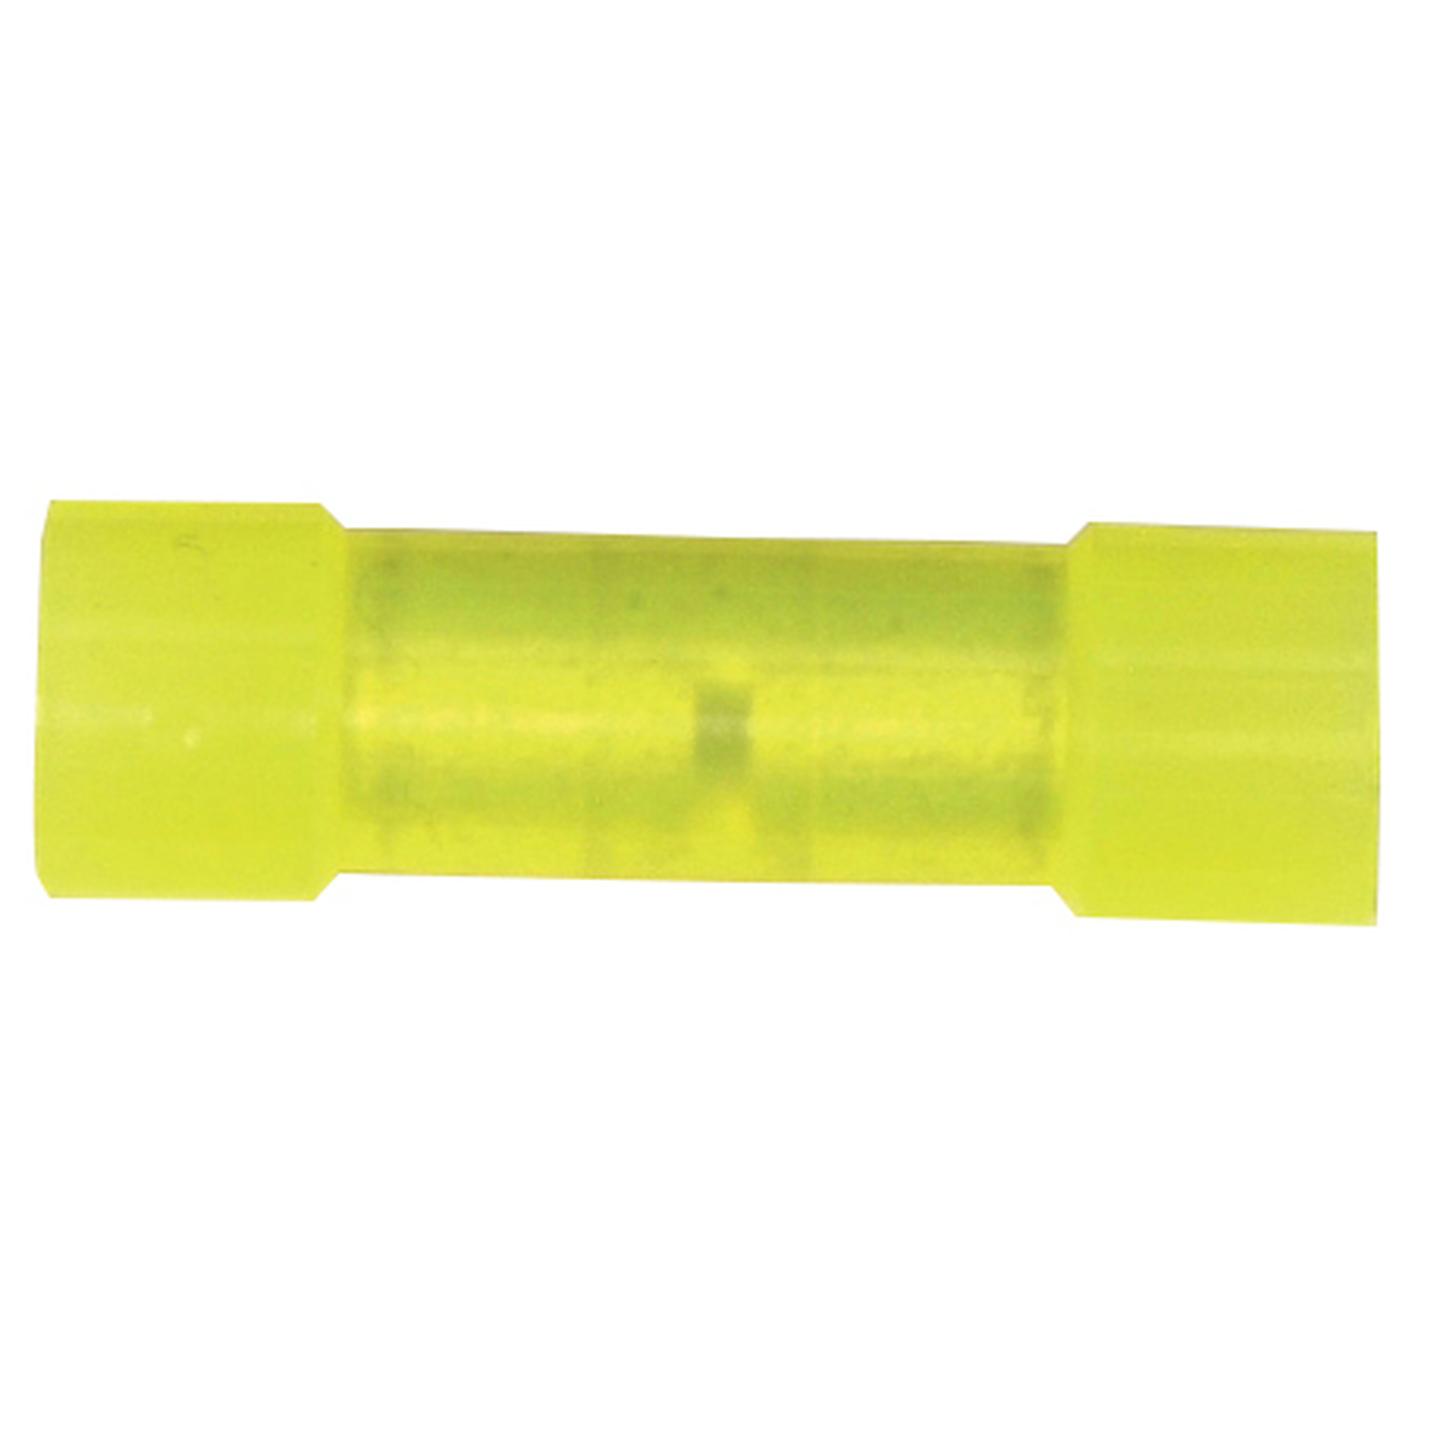 Butt Connector - Yellow - Pack of 100 Butt Connector - Yellow - Pack of 100